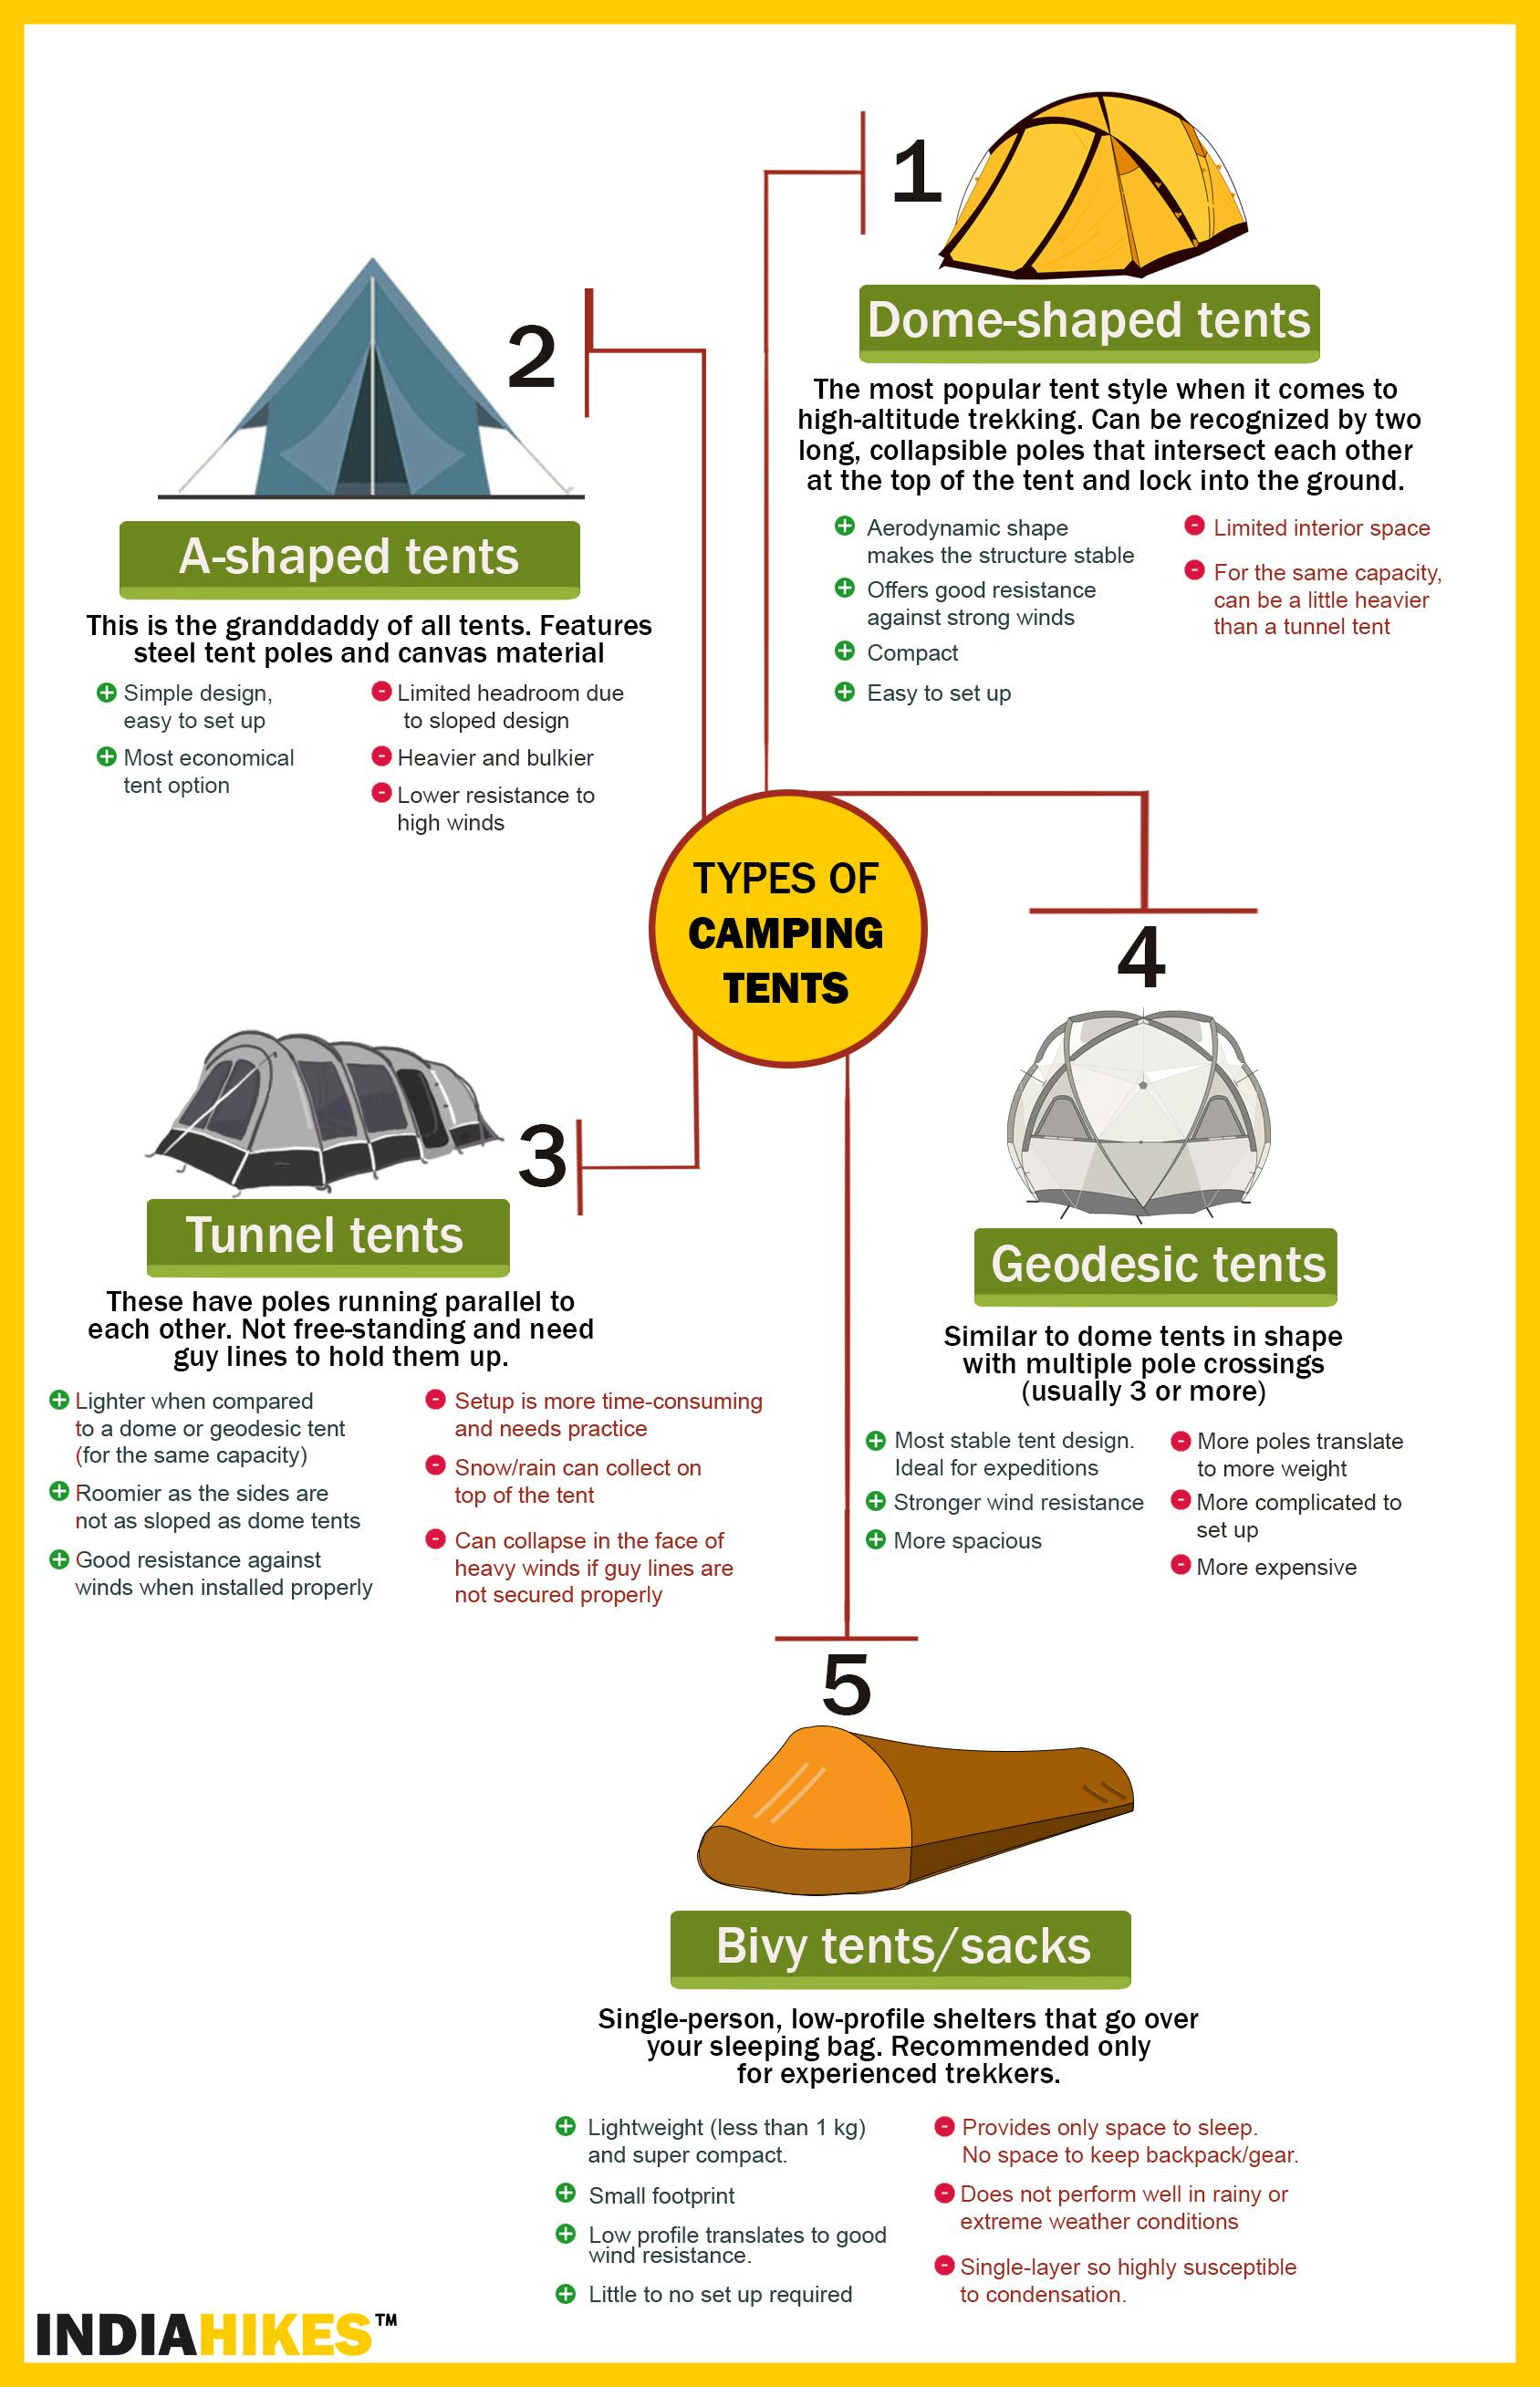 How To Choose Good Camping Tents For Your Himalayan Trek